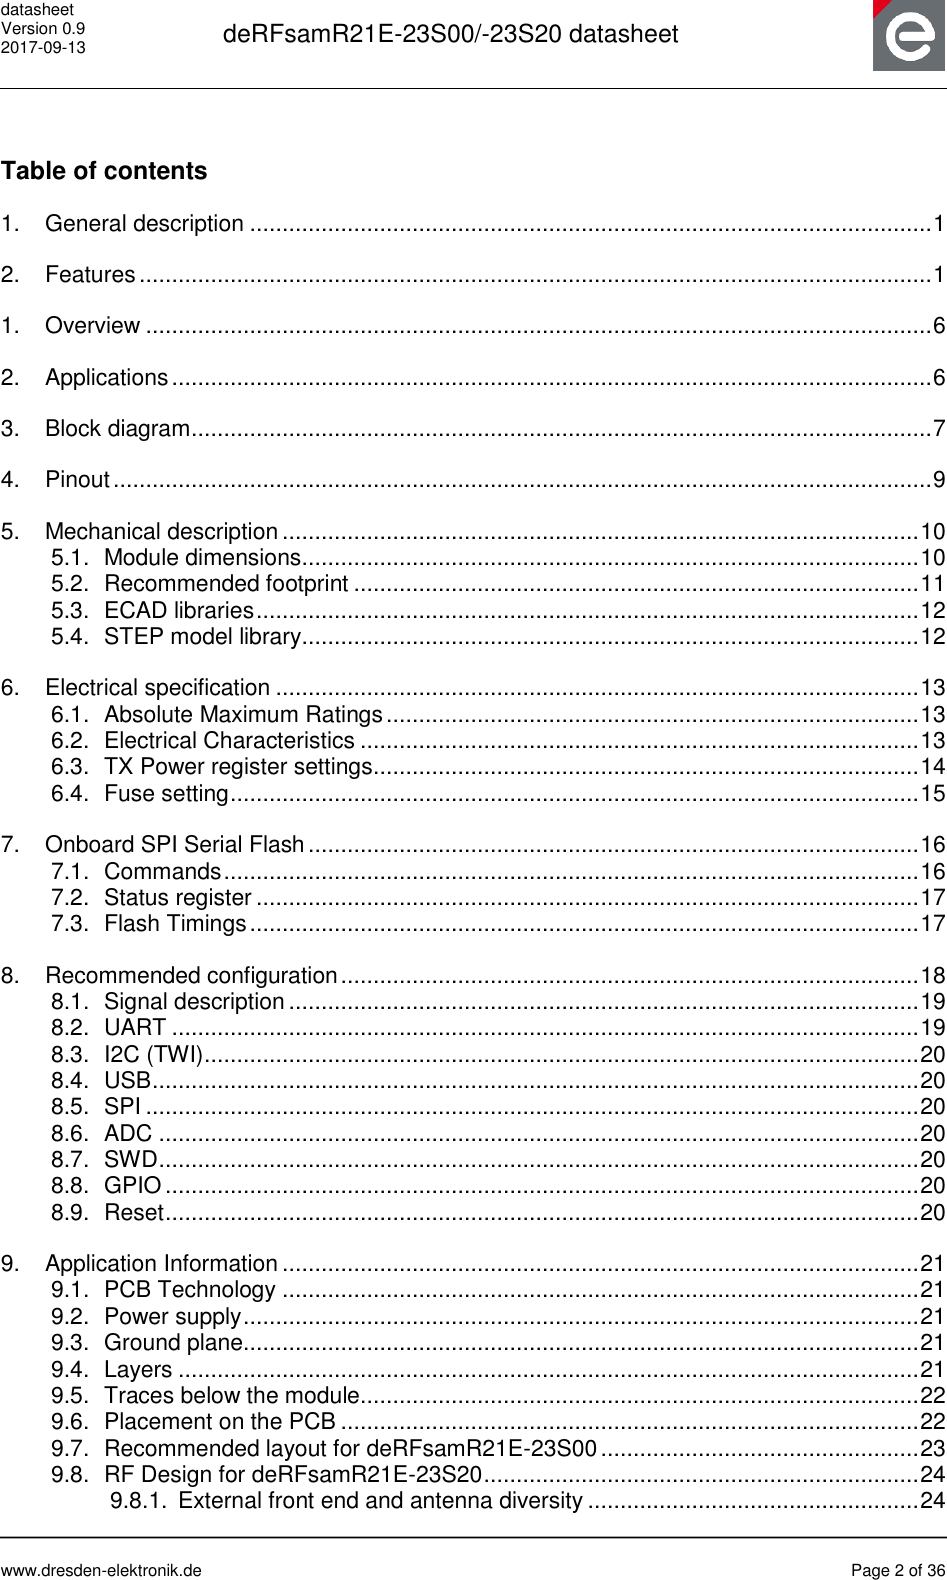 datasheet Version 0.9 2017-09-13  deRFsamR21E-23S00/-23S20 datasheet      www.dresden-elektronik.de  Page 2 of 36   Table of contents 1. General description ......................................................................................................... 1 2. Features .......................................................................................................................... 1 1. Overview ......................................................................................................................... 6 2. Applications ..................................................................................................................... 6 3. Block diagram .................................................................................................................. 7 4. Pinout .............................................................................................................................. 9 5. Mechanical description .................................................................................................. 10 5.1. Module dimensions............................................................................................... 10 5.2. Recommended footprint ....................................................................................... 11 5.3. ECAD libraries ...................................................................................................... 12 5.4. STEP model library............................................................................................... 12 6. Electrical specification ................................................................................................... 13 6.1. Absolute Maximum Ratings .................................................................................. 13 6.2. Electrical Characteristics ...................................................................................... 13 6.3. TX Power register settings .................................................................................... 14 6.4. Fuse setting .......................................................................................................... 15 7. Onboard SPI Serial Flash .............................................................................................. 16 7.1. Commands ........................................................................................................... 16 7.2. Status register ...................................................................................................... 17 7.3. Flash Timings ....................................................................................................... 17 8. Recommended configuration ......................................................................................... 18 8.1. Signal description ................................................................................................. 19 8.2. UART ................................................................................................................... 19 8.3. I2C (TWI) .............................................................................................................. 20 8.4. USB ...................................................................................................................... 20 8.5. SPI ....................................................................................................................... 20 8.6. ADC ..................................................................................................................... 20 8.7. SWD ..................................................................................................................... 20 8.8. GPIO .................................................................................................................... 20 8.9. Reset .................................................................................................................... 20 9. Application Information .................................................................................................. 21 9.1. PCB Technology .................................................................................................. 21 9.2. Power supply ........................................................................................................ 21 9.3. Ground plane........................................................................................................ 21 9.4. Layers .................................................................................................................. 21 9.5. Traces below the module...................................................................................... 22 9.6. Placement on the PCB ......................................................................................... 22 9.7. Recommended layout for deRFsamR21E-23S00 ................................................. 23 9.8. RF Design for deRFsamR21E-23S20 ................................................................... 24 9.8.1. External front end and antenna diversity ................................................... 24 